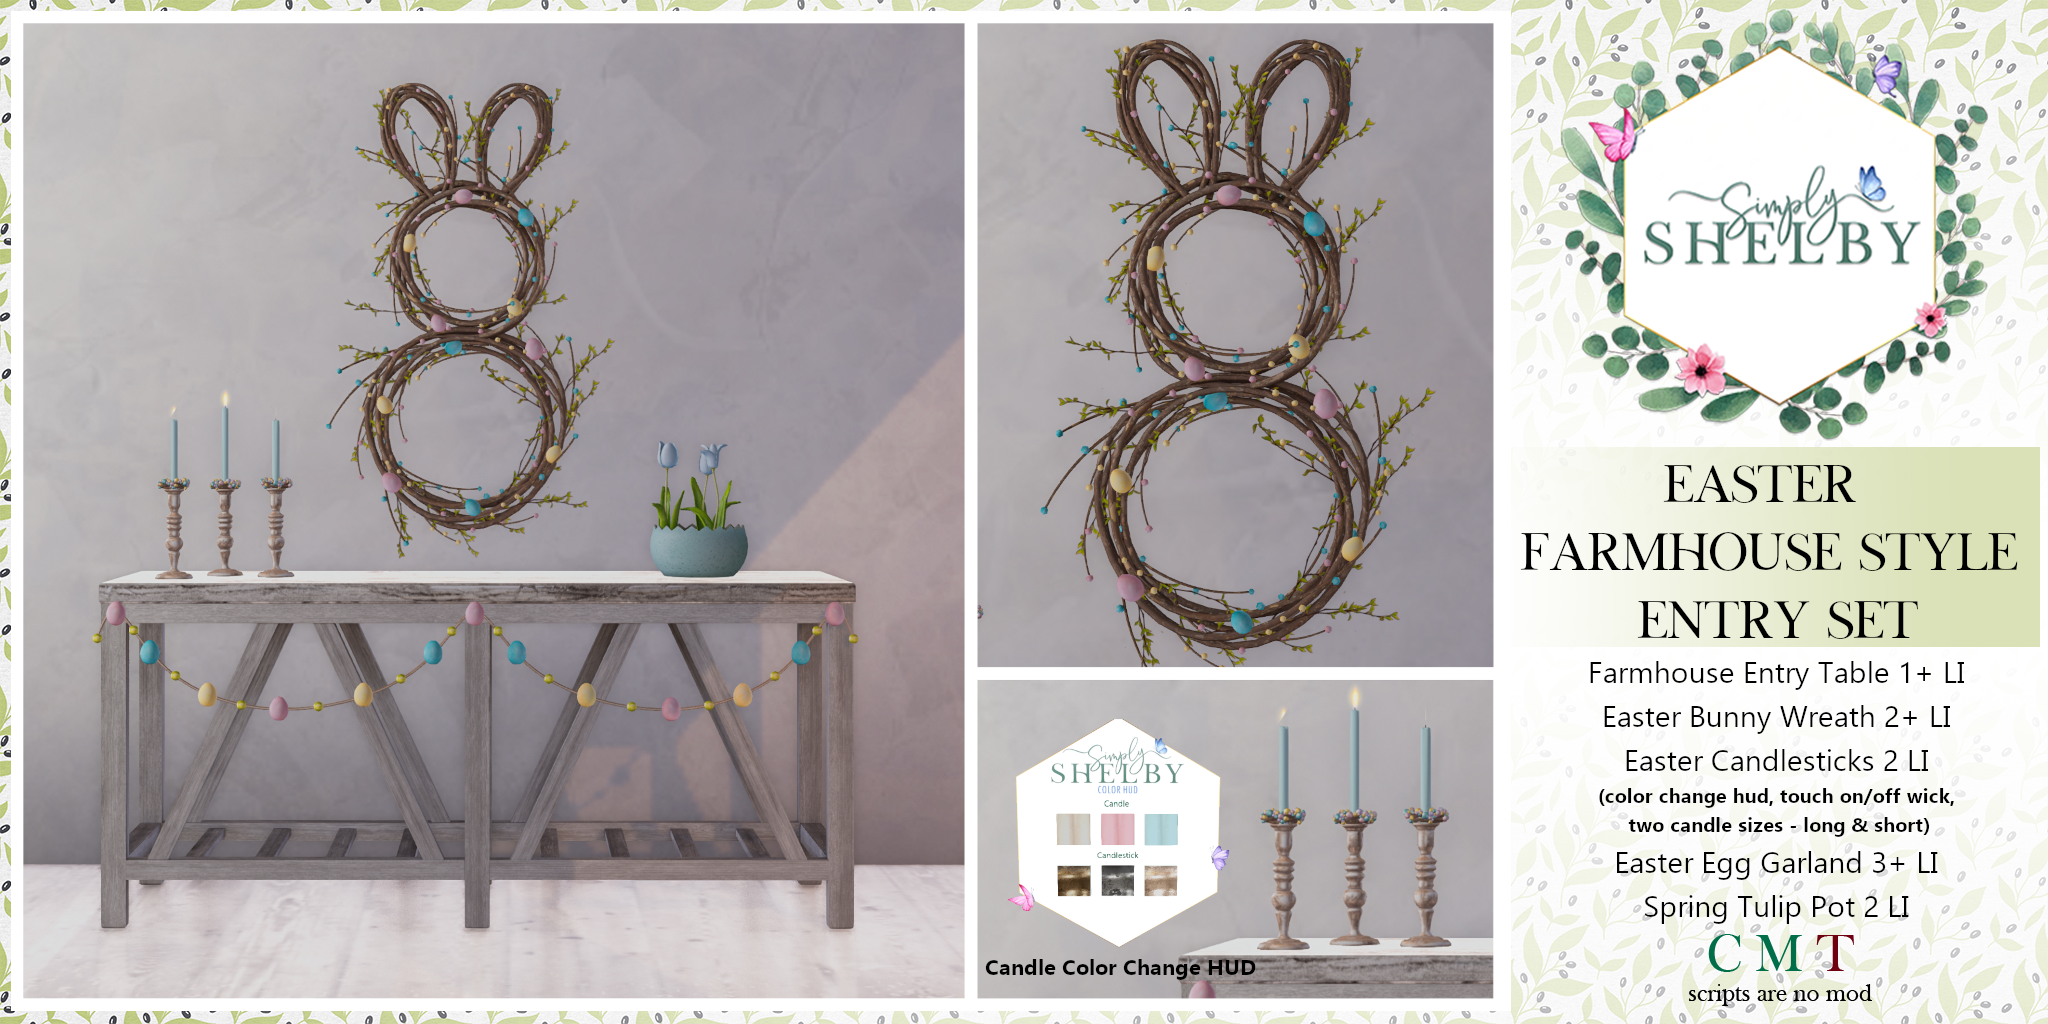 Simply Shelby – Easter Farmhouse Entry Set & Easter Table Decor